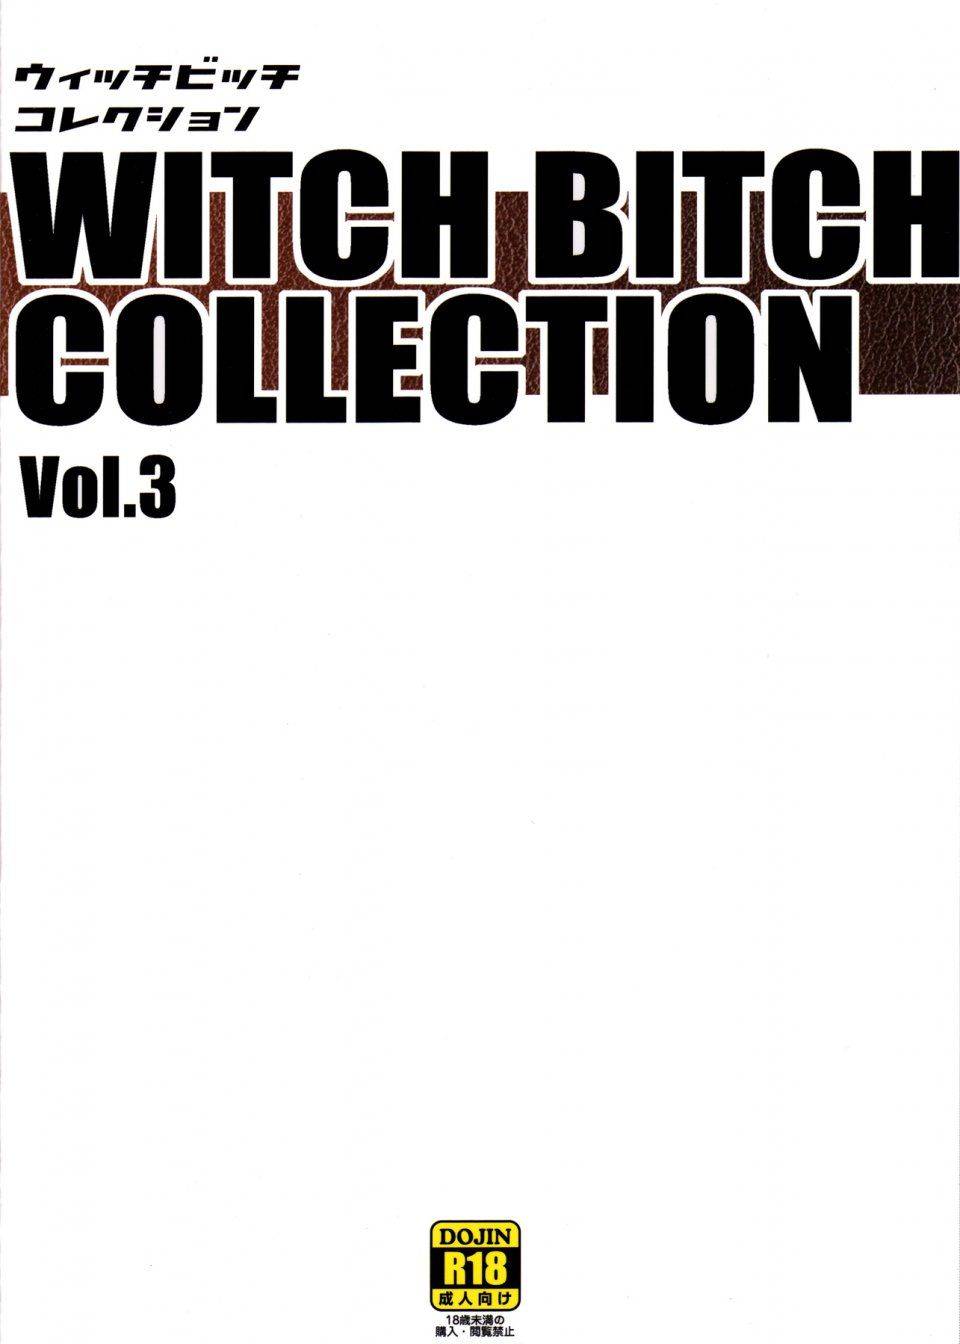 Tamagoro - Witch Bitch Collection Vol. 3 - Photo #50